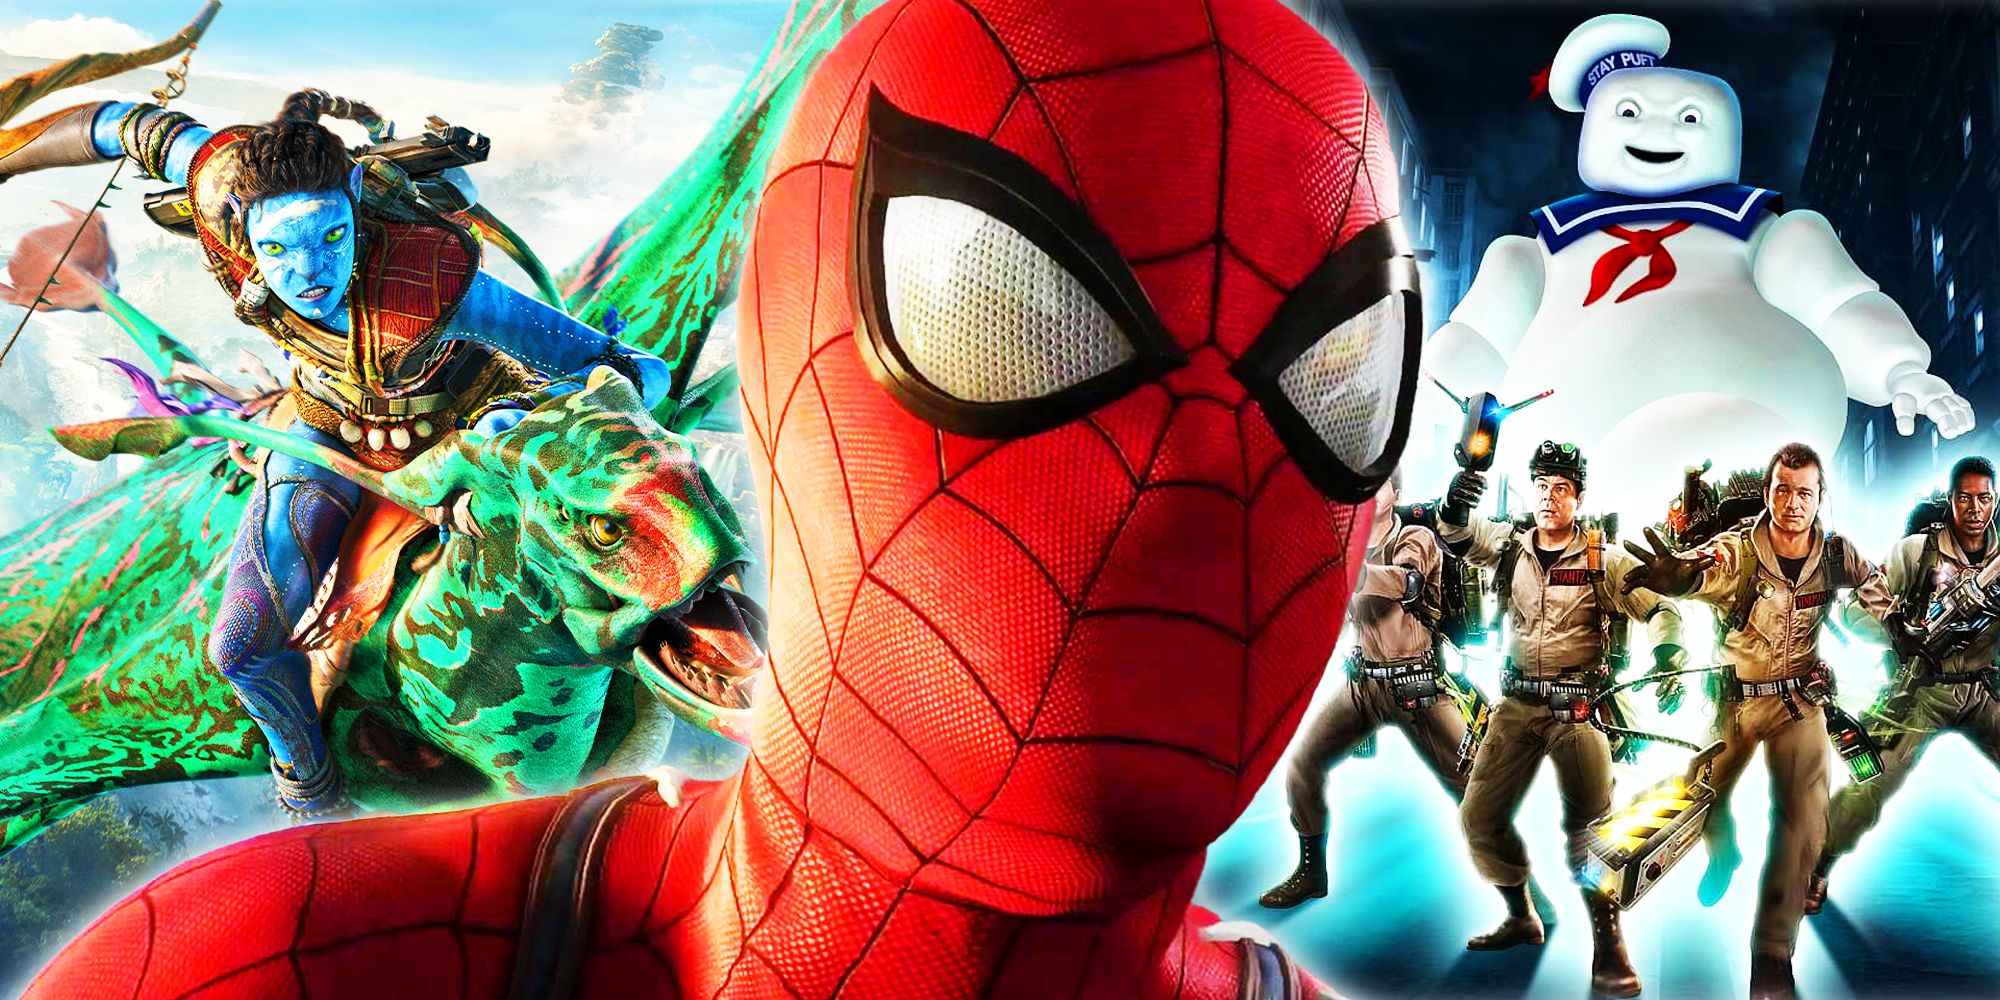 Spider-Man PS4, Avatar Frontiers of Pandora, and Ghostbusters The Video Game